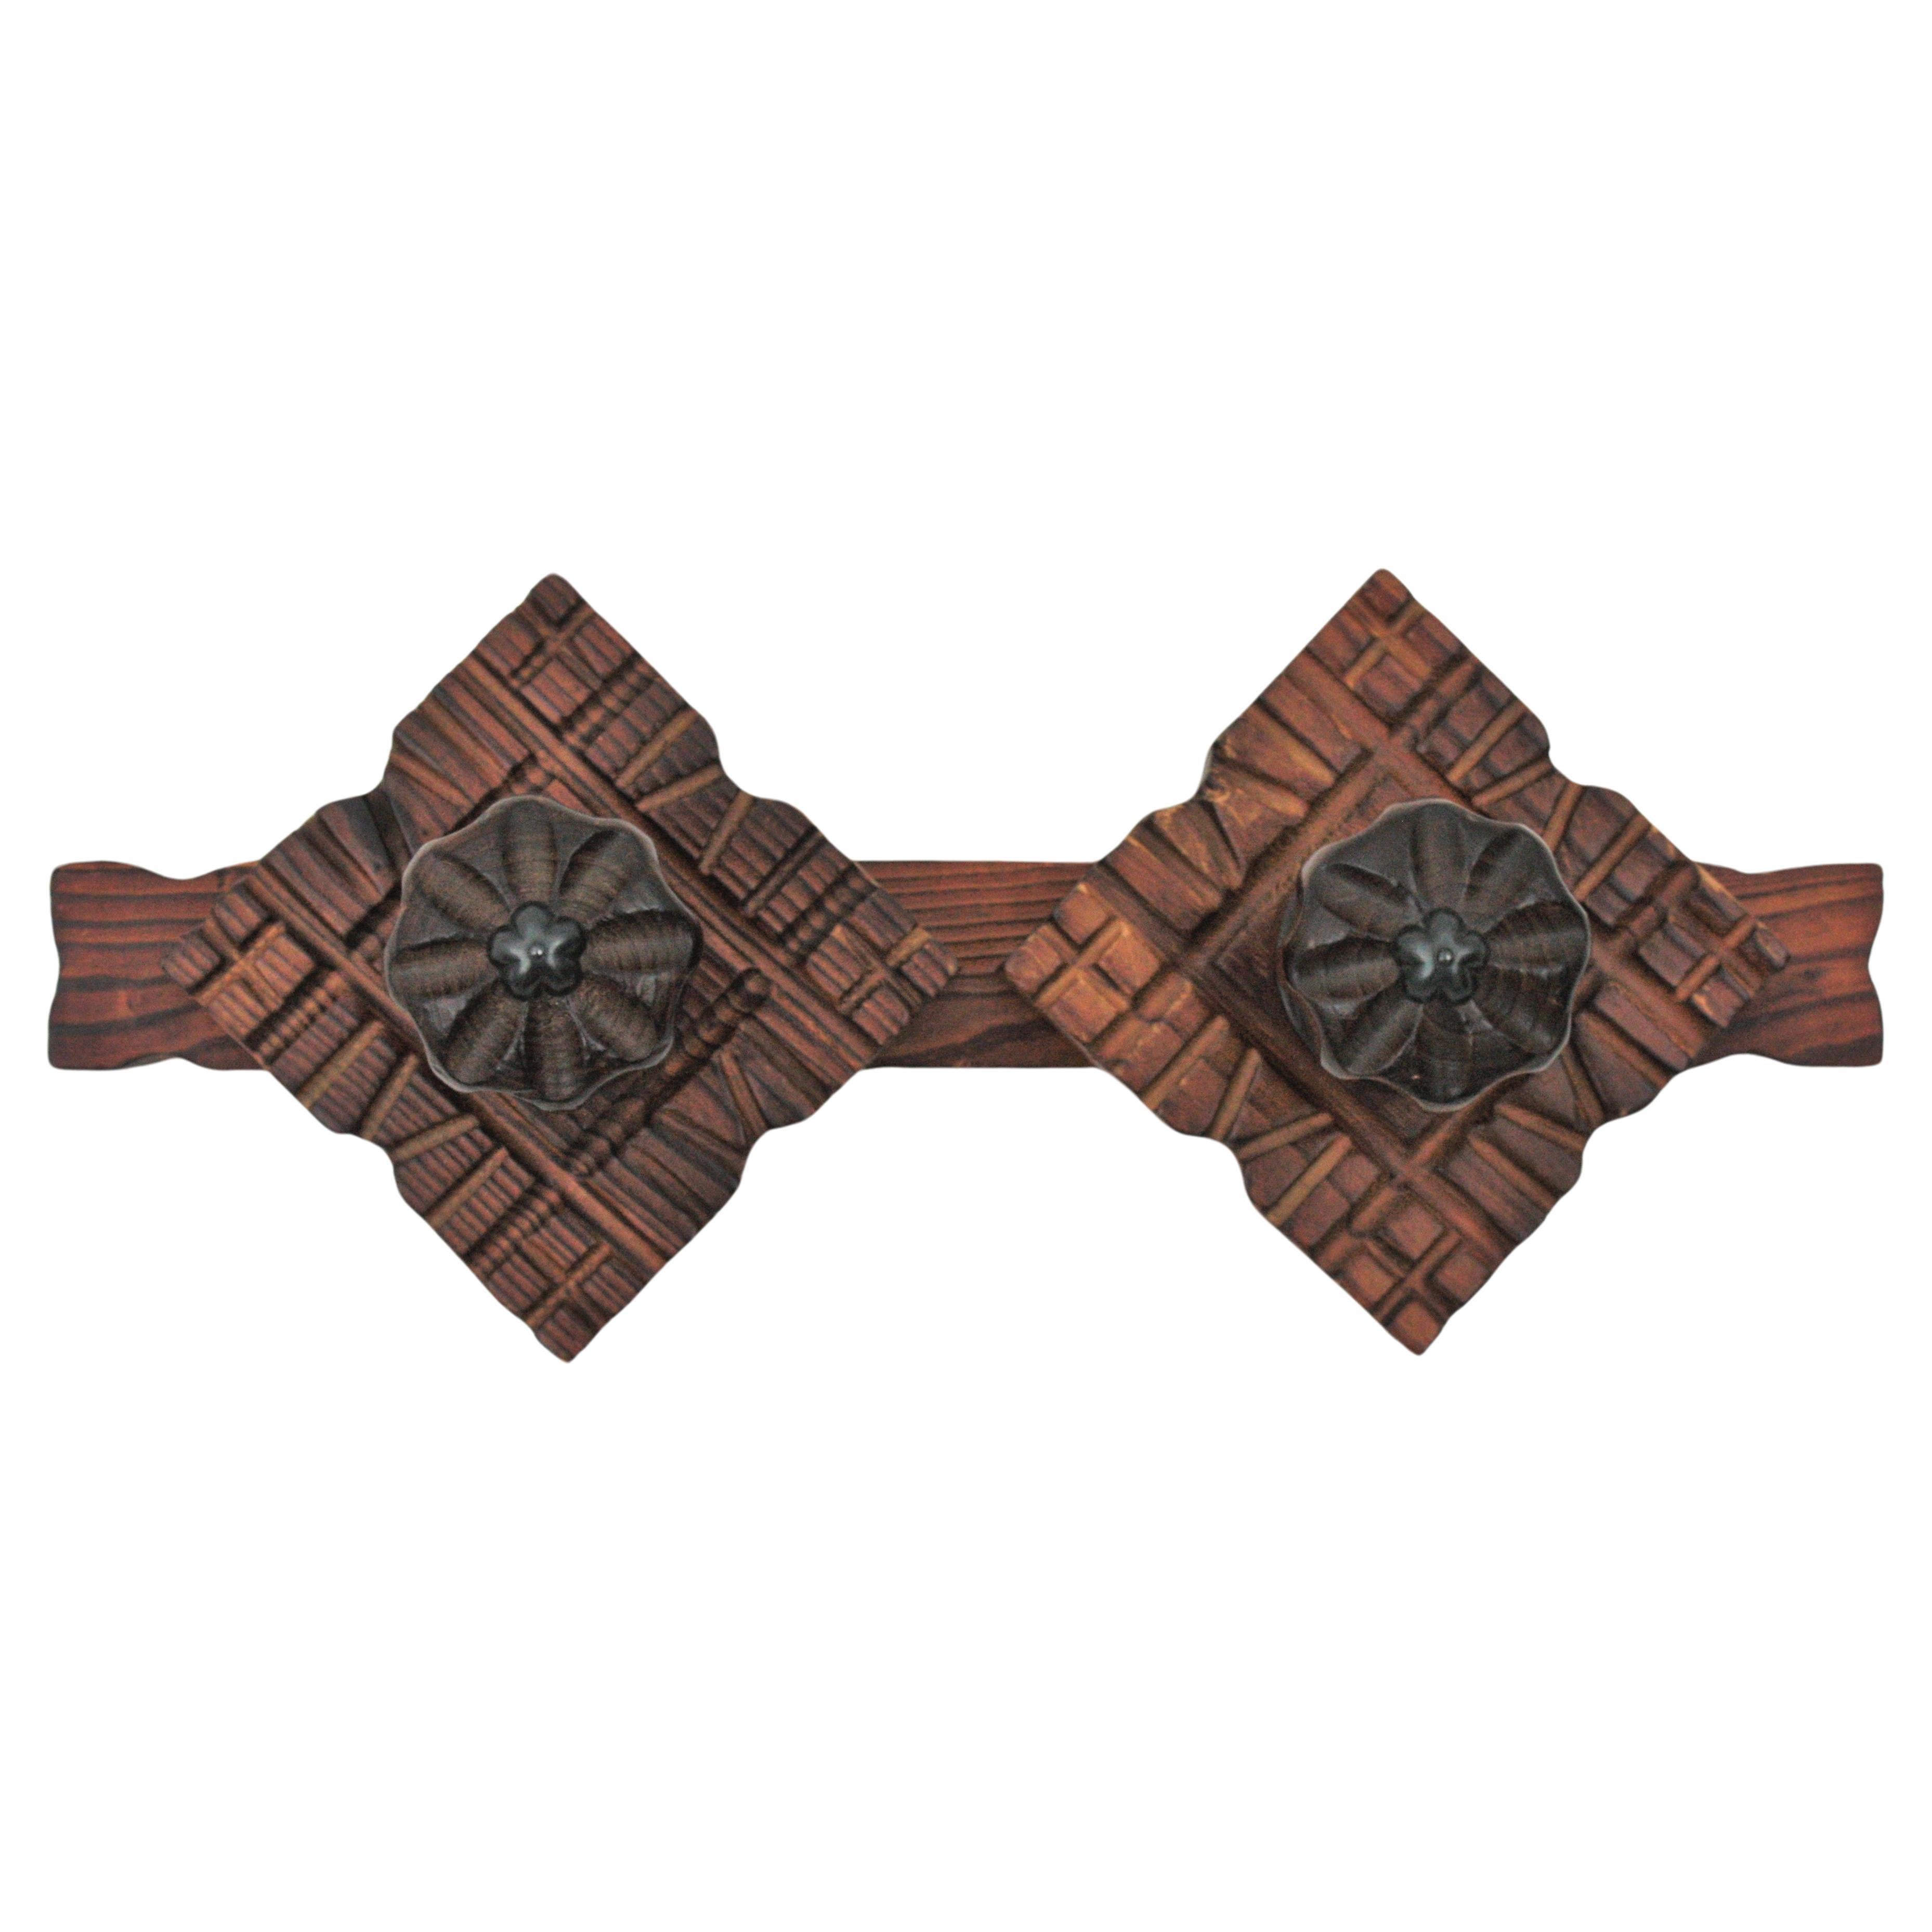 Handcarved pine wood wall coat rack, 2 hangers, Spain, 1940s.
This eye-catching coat rack has 2 flower shaped hangers with beautifully carved and rhombus shaped backplates with geometric details.
It has a rustic finish and spanish colonial